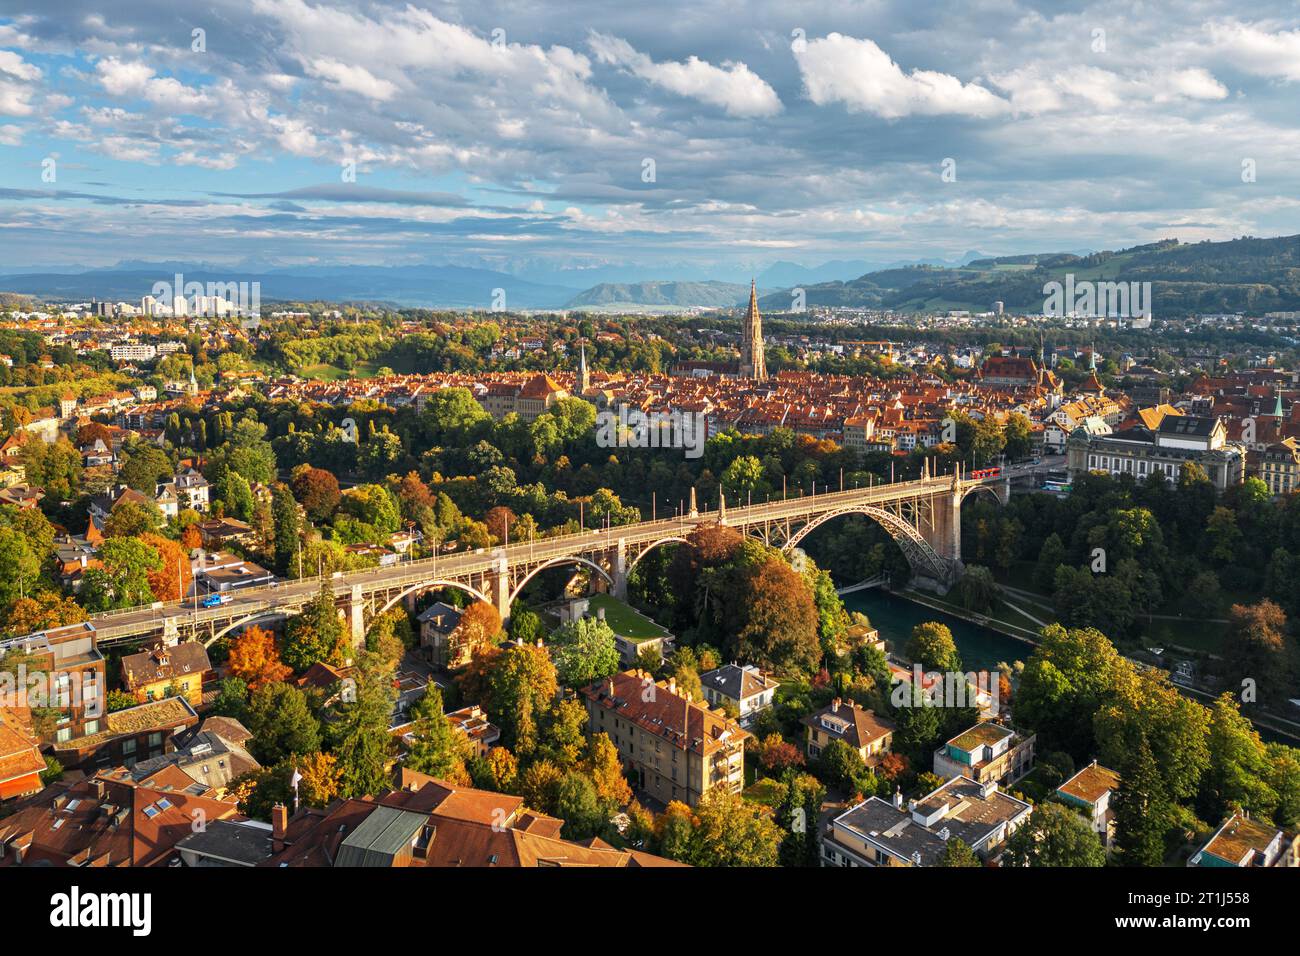 Bern, Switzerland old city view with early autumn foliage. Stock Photo